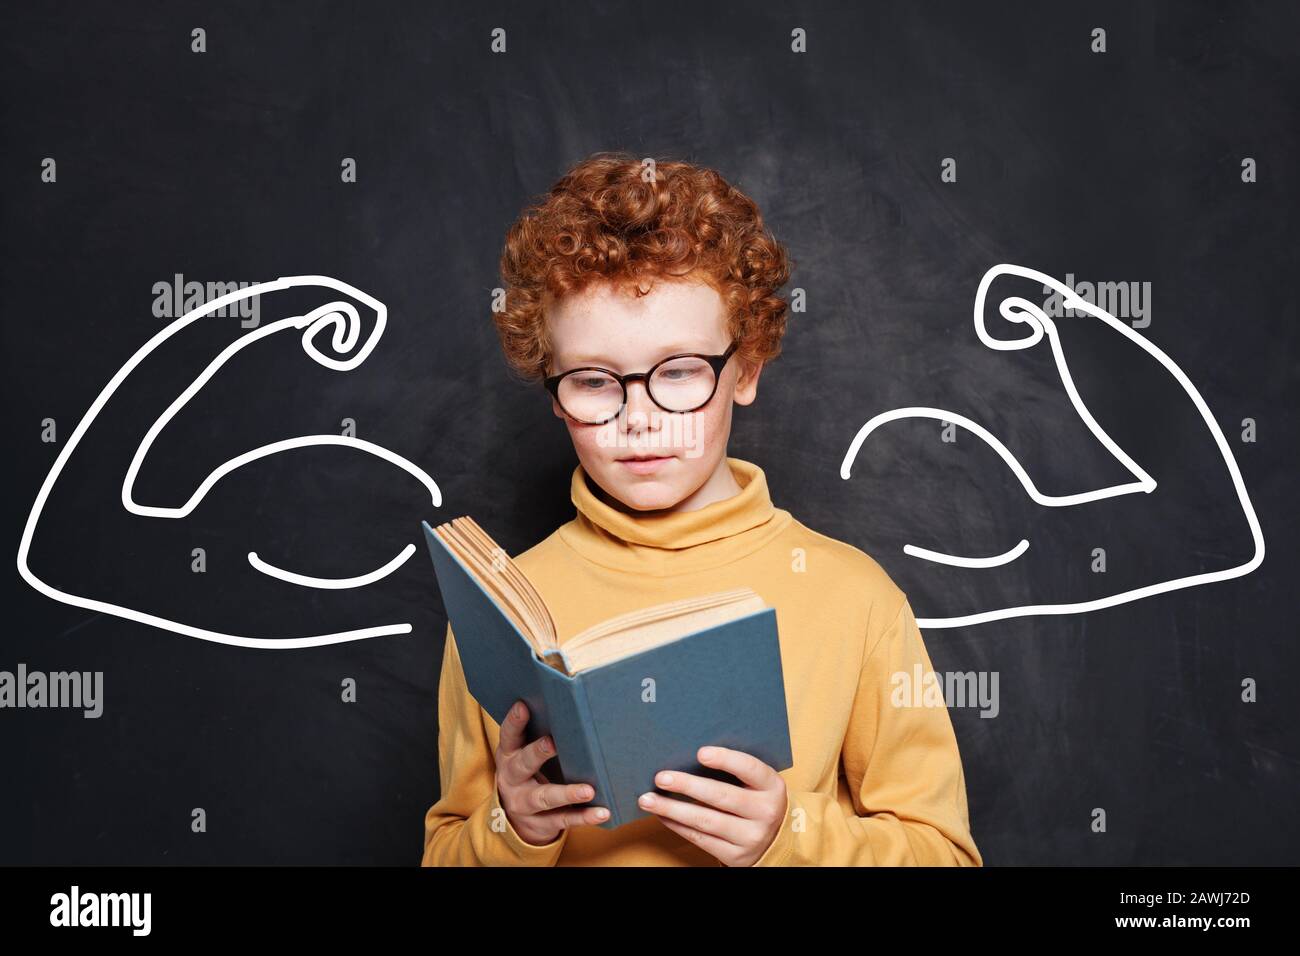 Smart kid student wearing glasses holding book on black Stock Photo